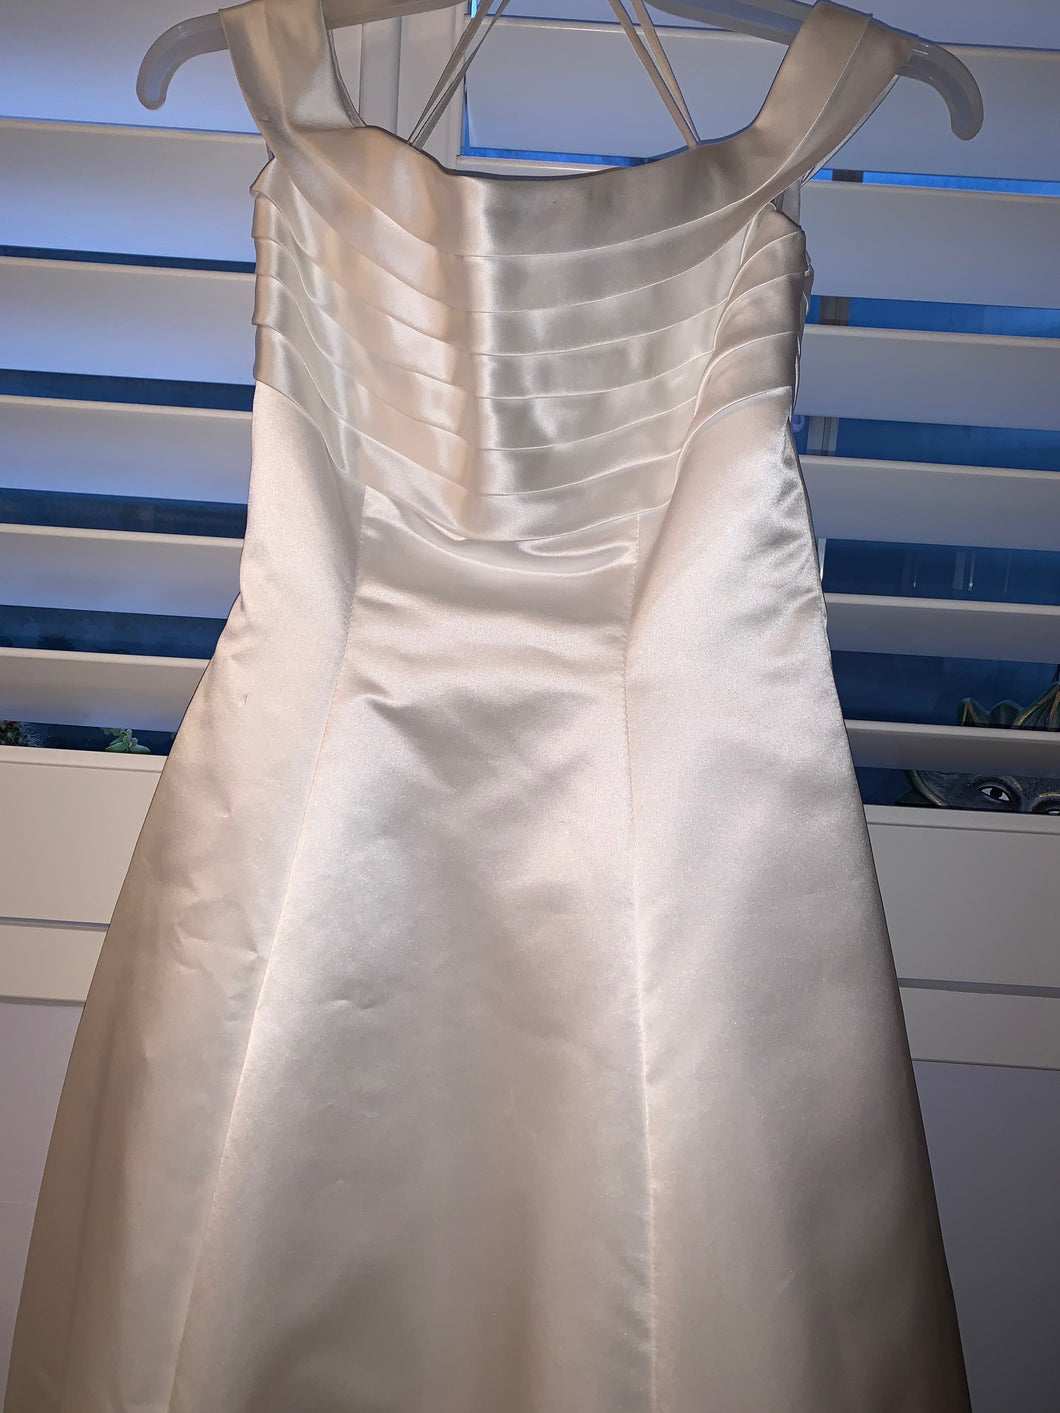 Mori Lee 'Off The Shoulder' size 4 used wedding dress front view on hanger